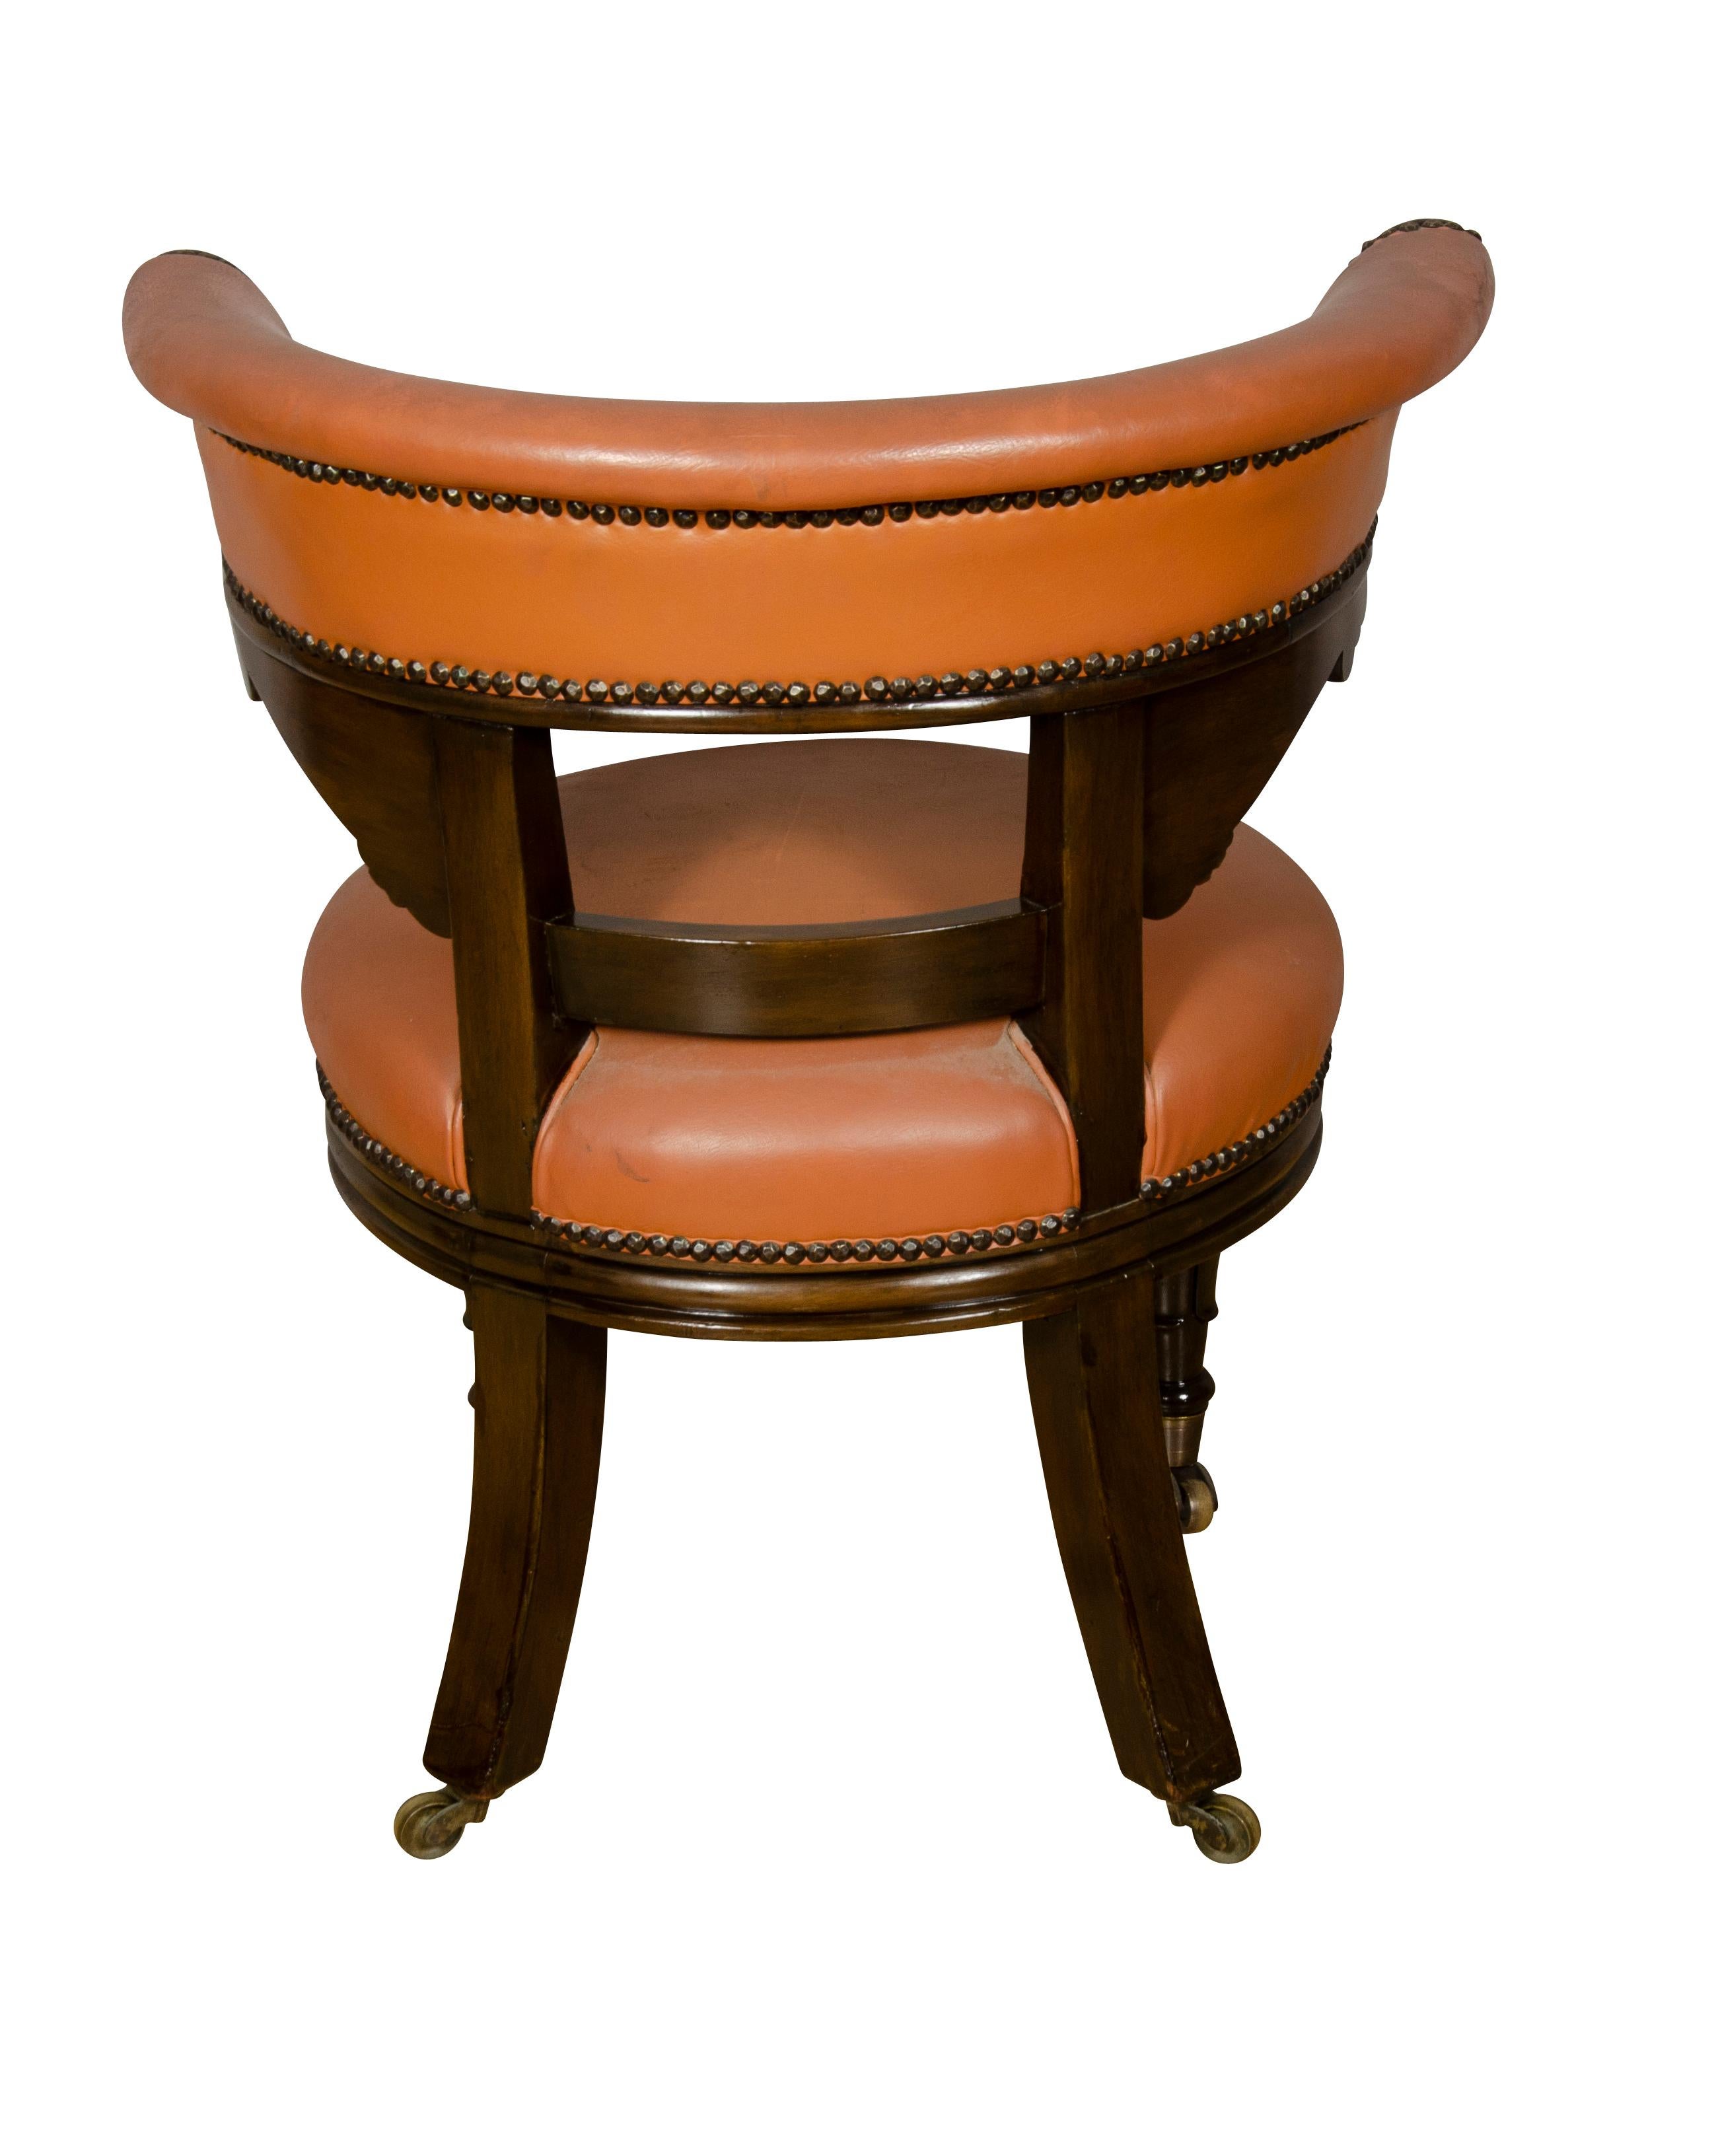 19th Century Pair of Regency Style Mahogany Chairs For Sale